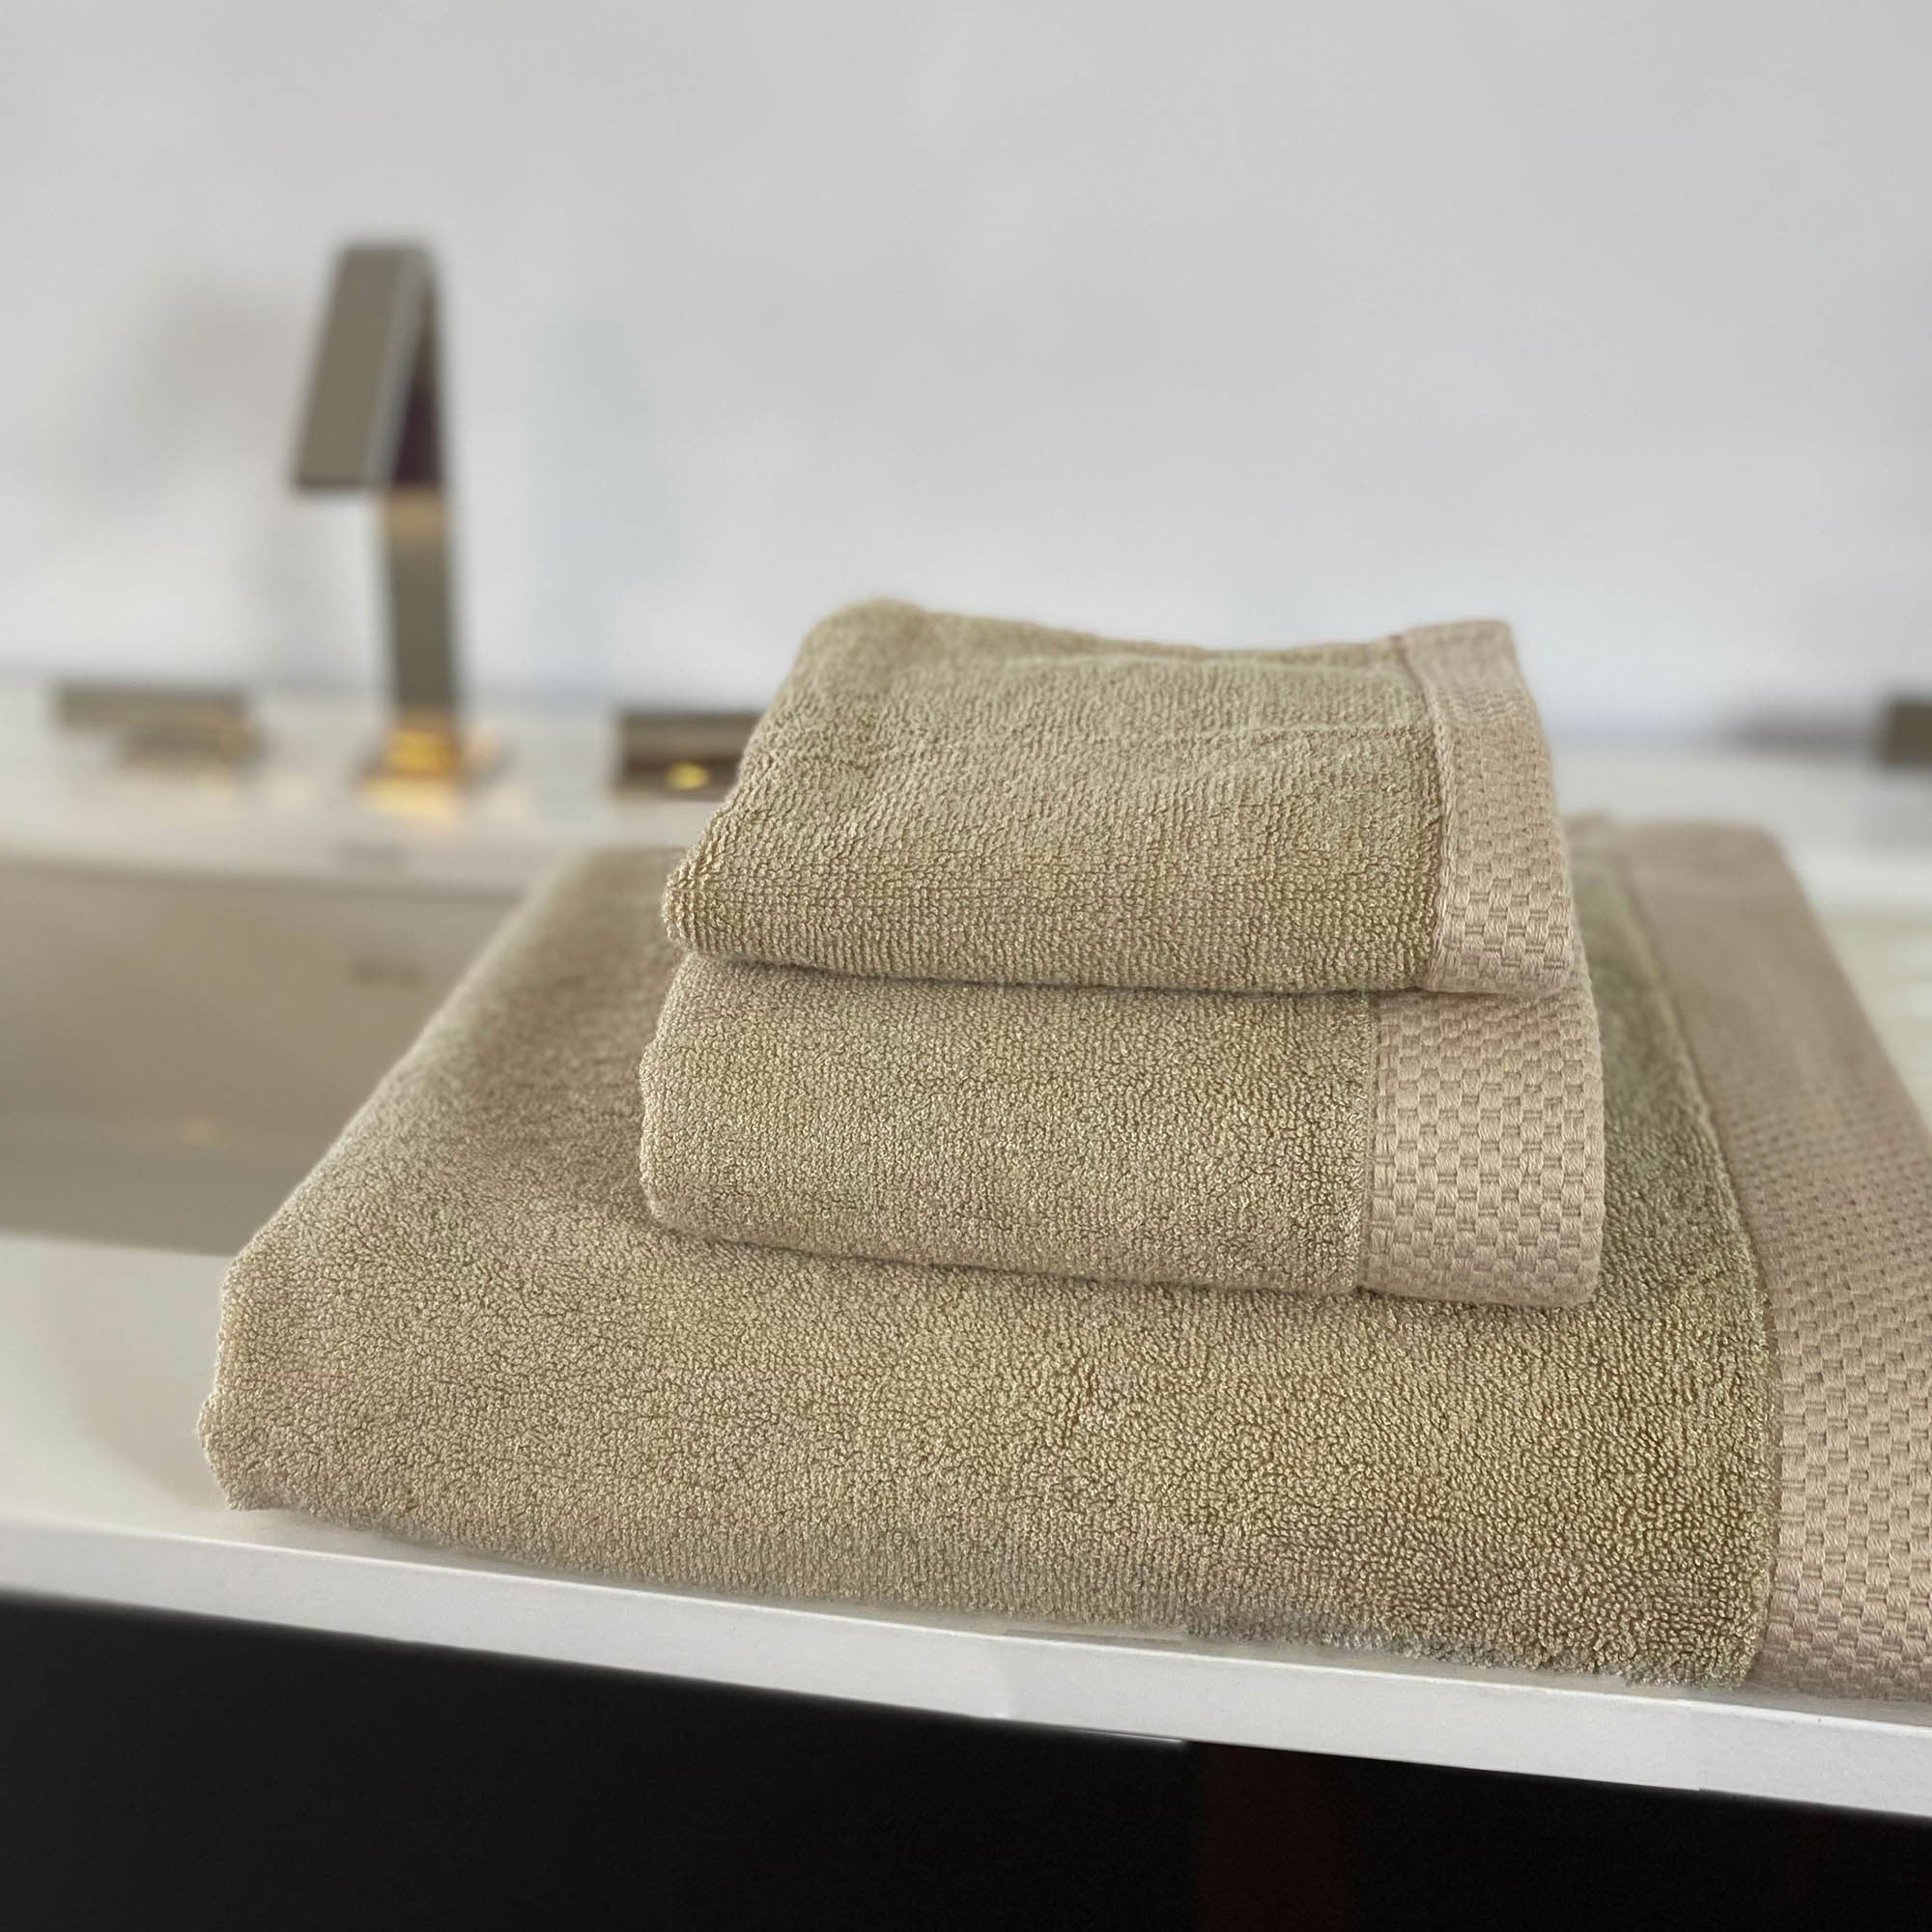 Luxury BAMBOO Towel Set 3Pcs - Extra Gentle, Dry Off Quickly, Spa-Quality Softness Bath Towels -  Champagne